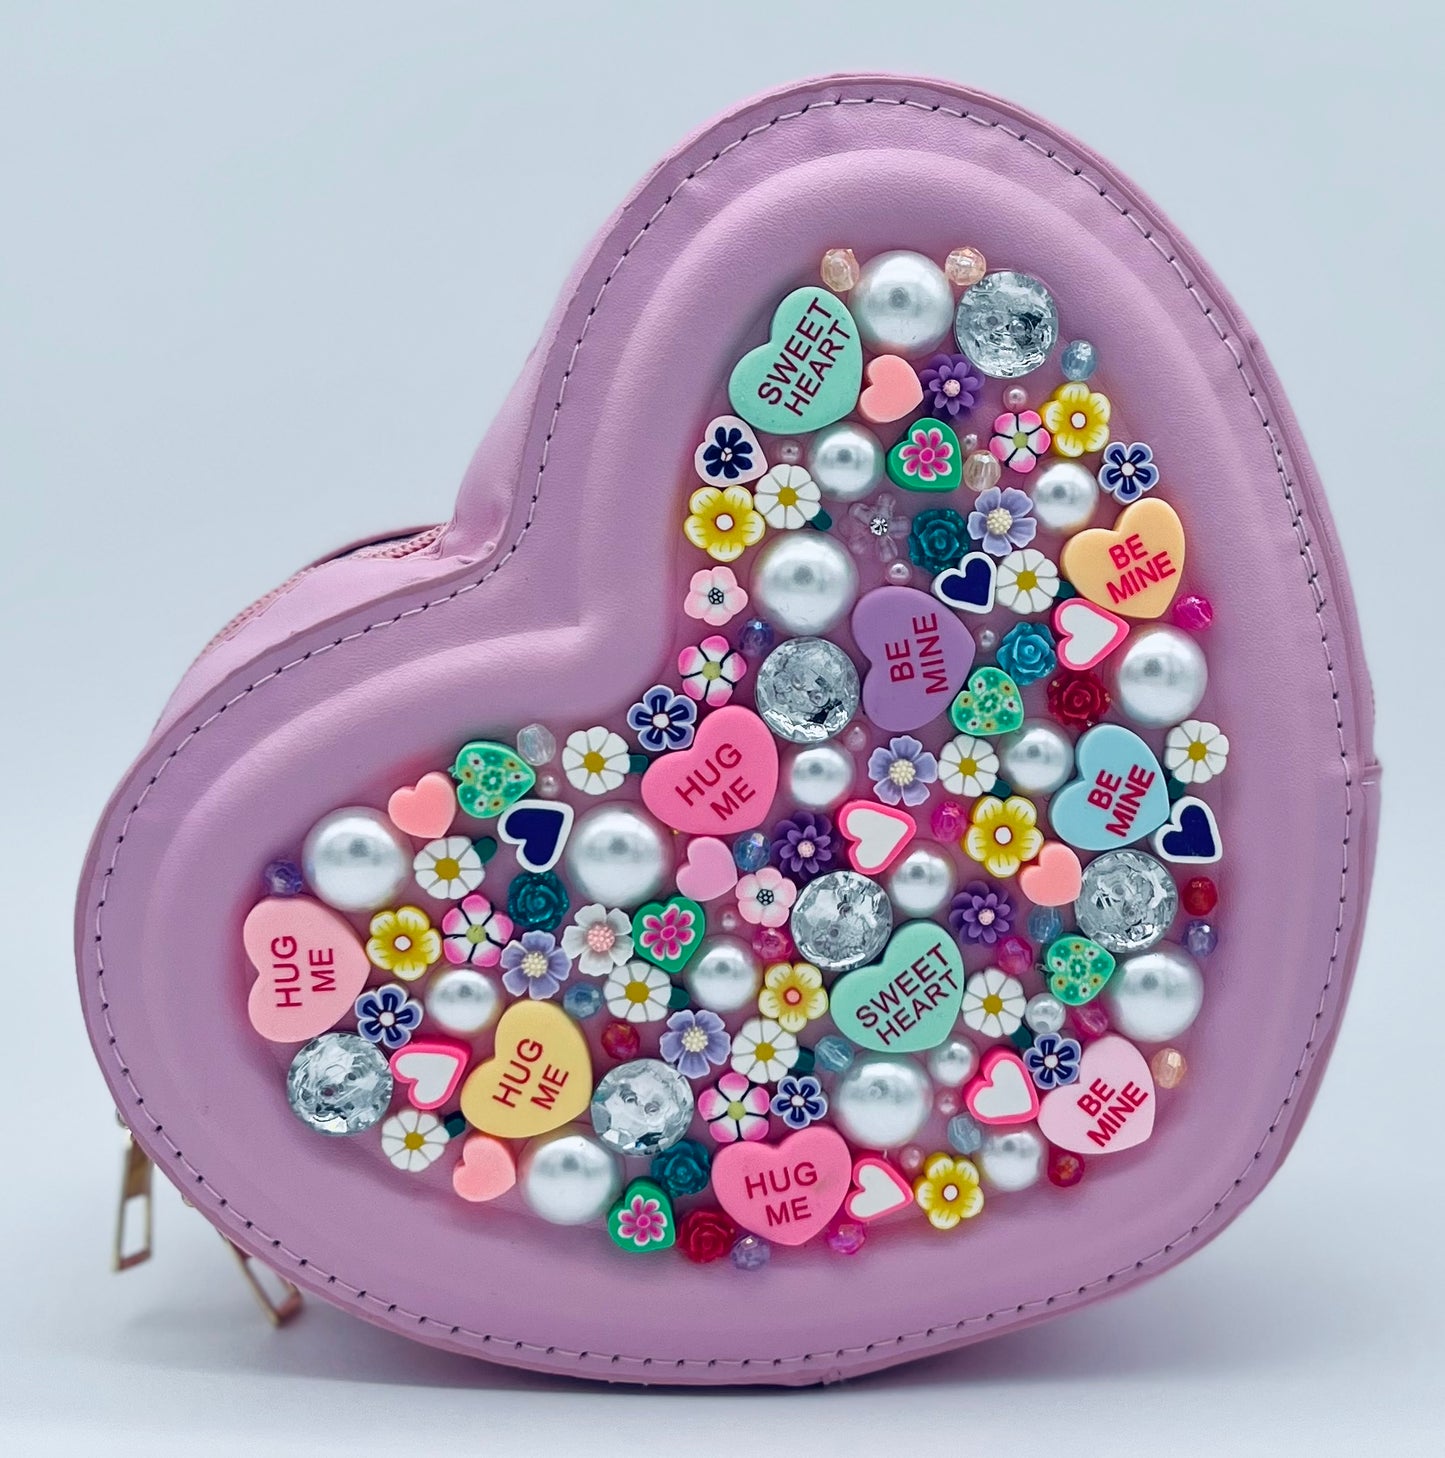 Sweetheart Novelty Purse topped with Extra Hearts and Jewels